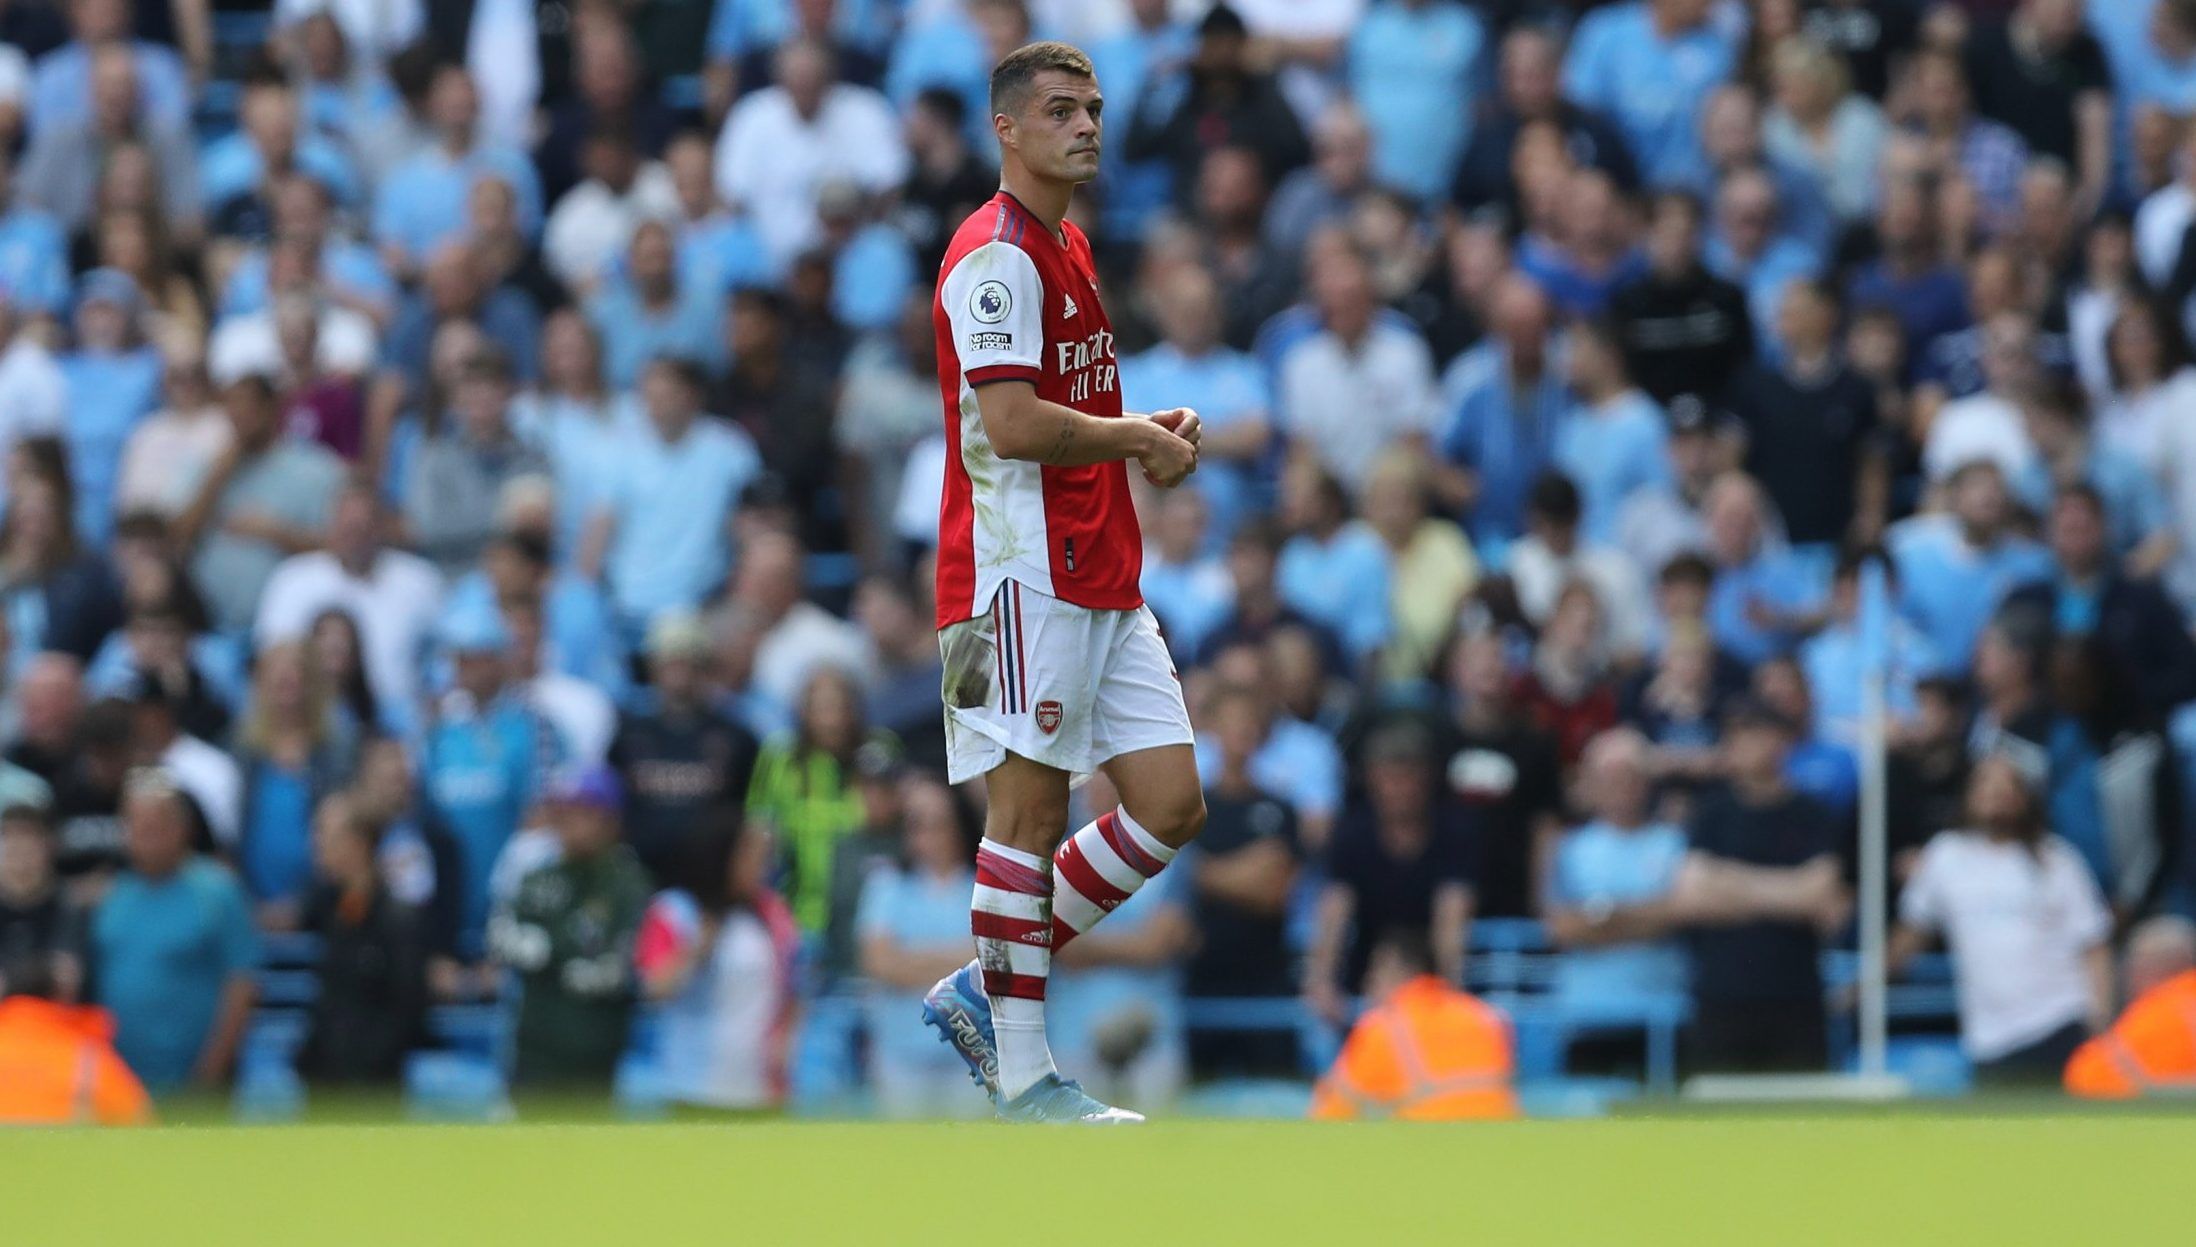 Arsenal midfielder Granit Xhaka walks off the pitch after being sent off against Manchester City in the Premier League